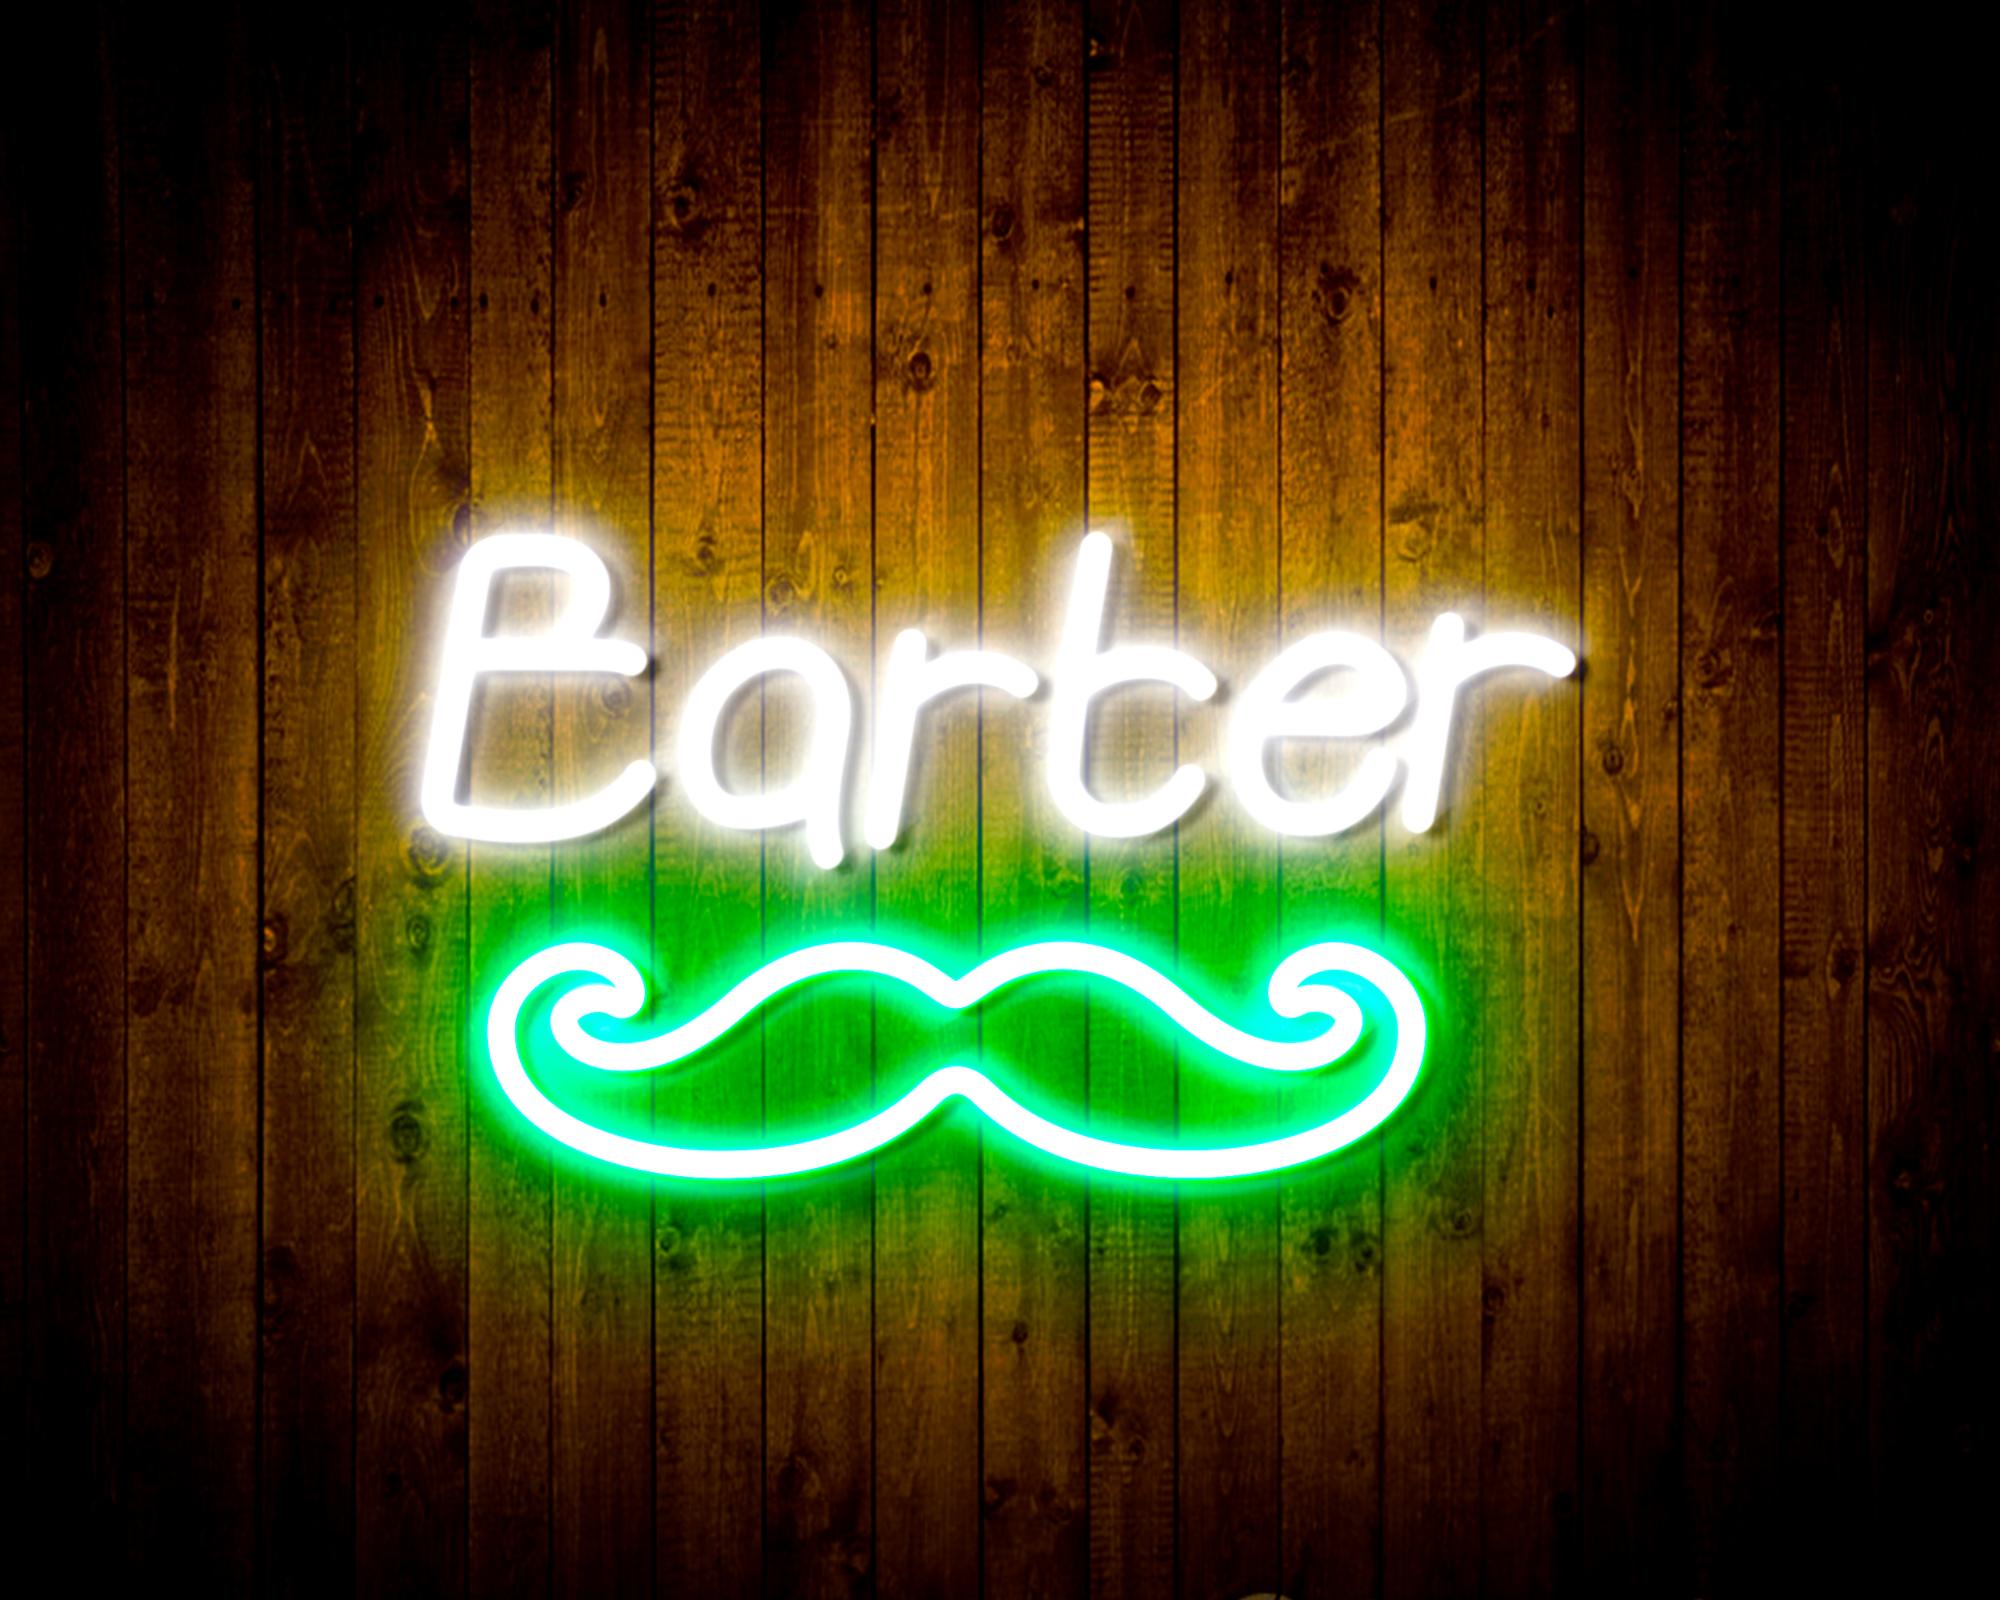 Barber with Moustache LED Neon Sign Wall Light